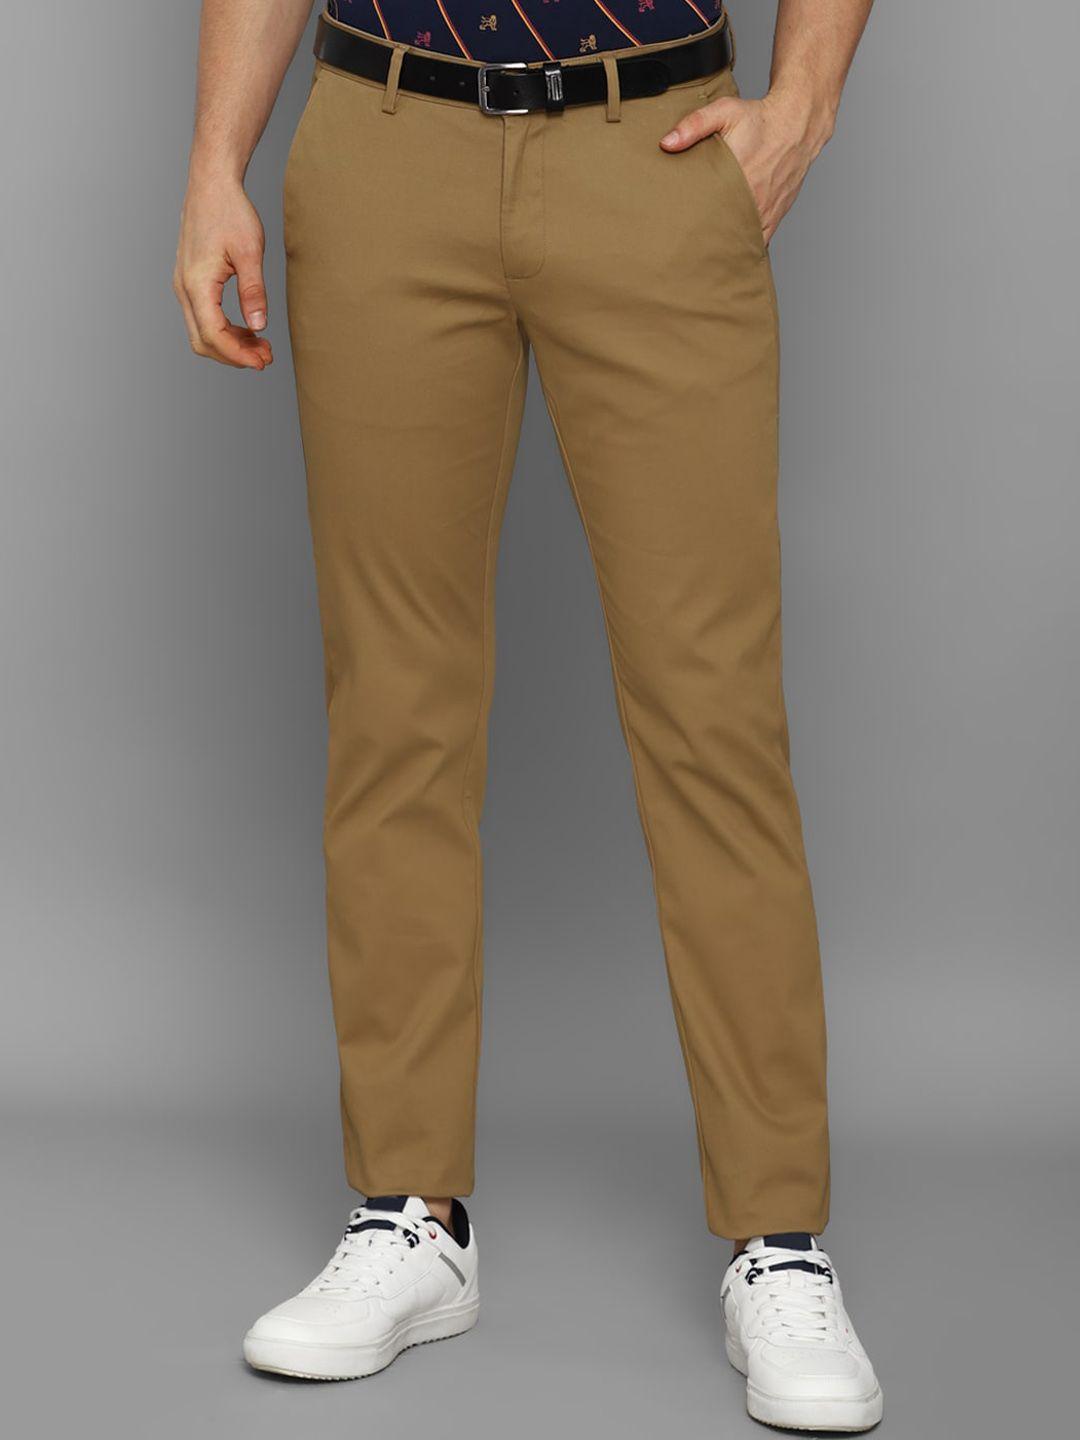 allen-solly-men-brown-slim-fit-casual-mid-rise-trousers